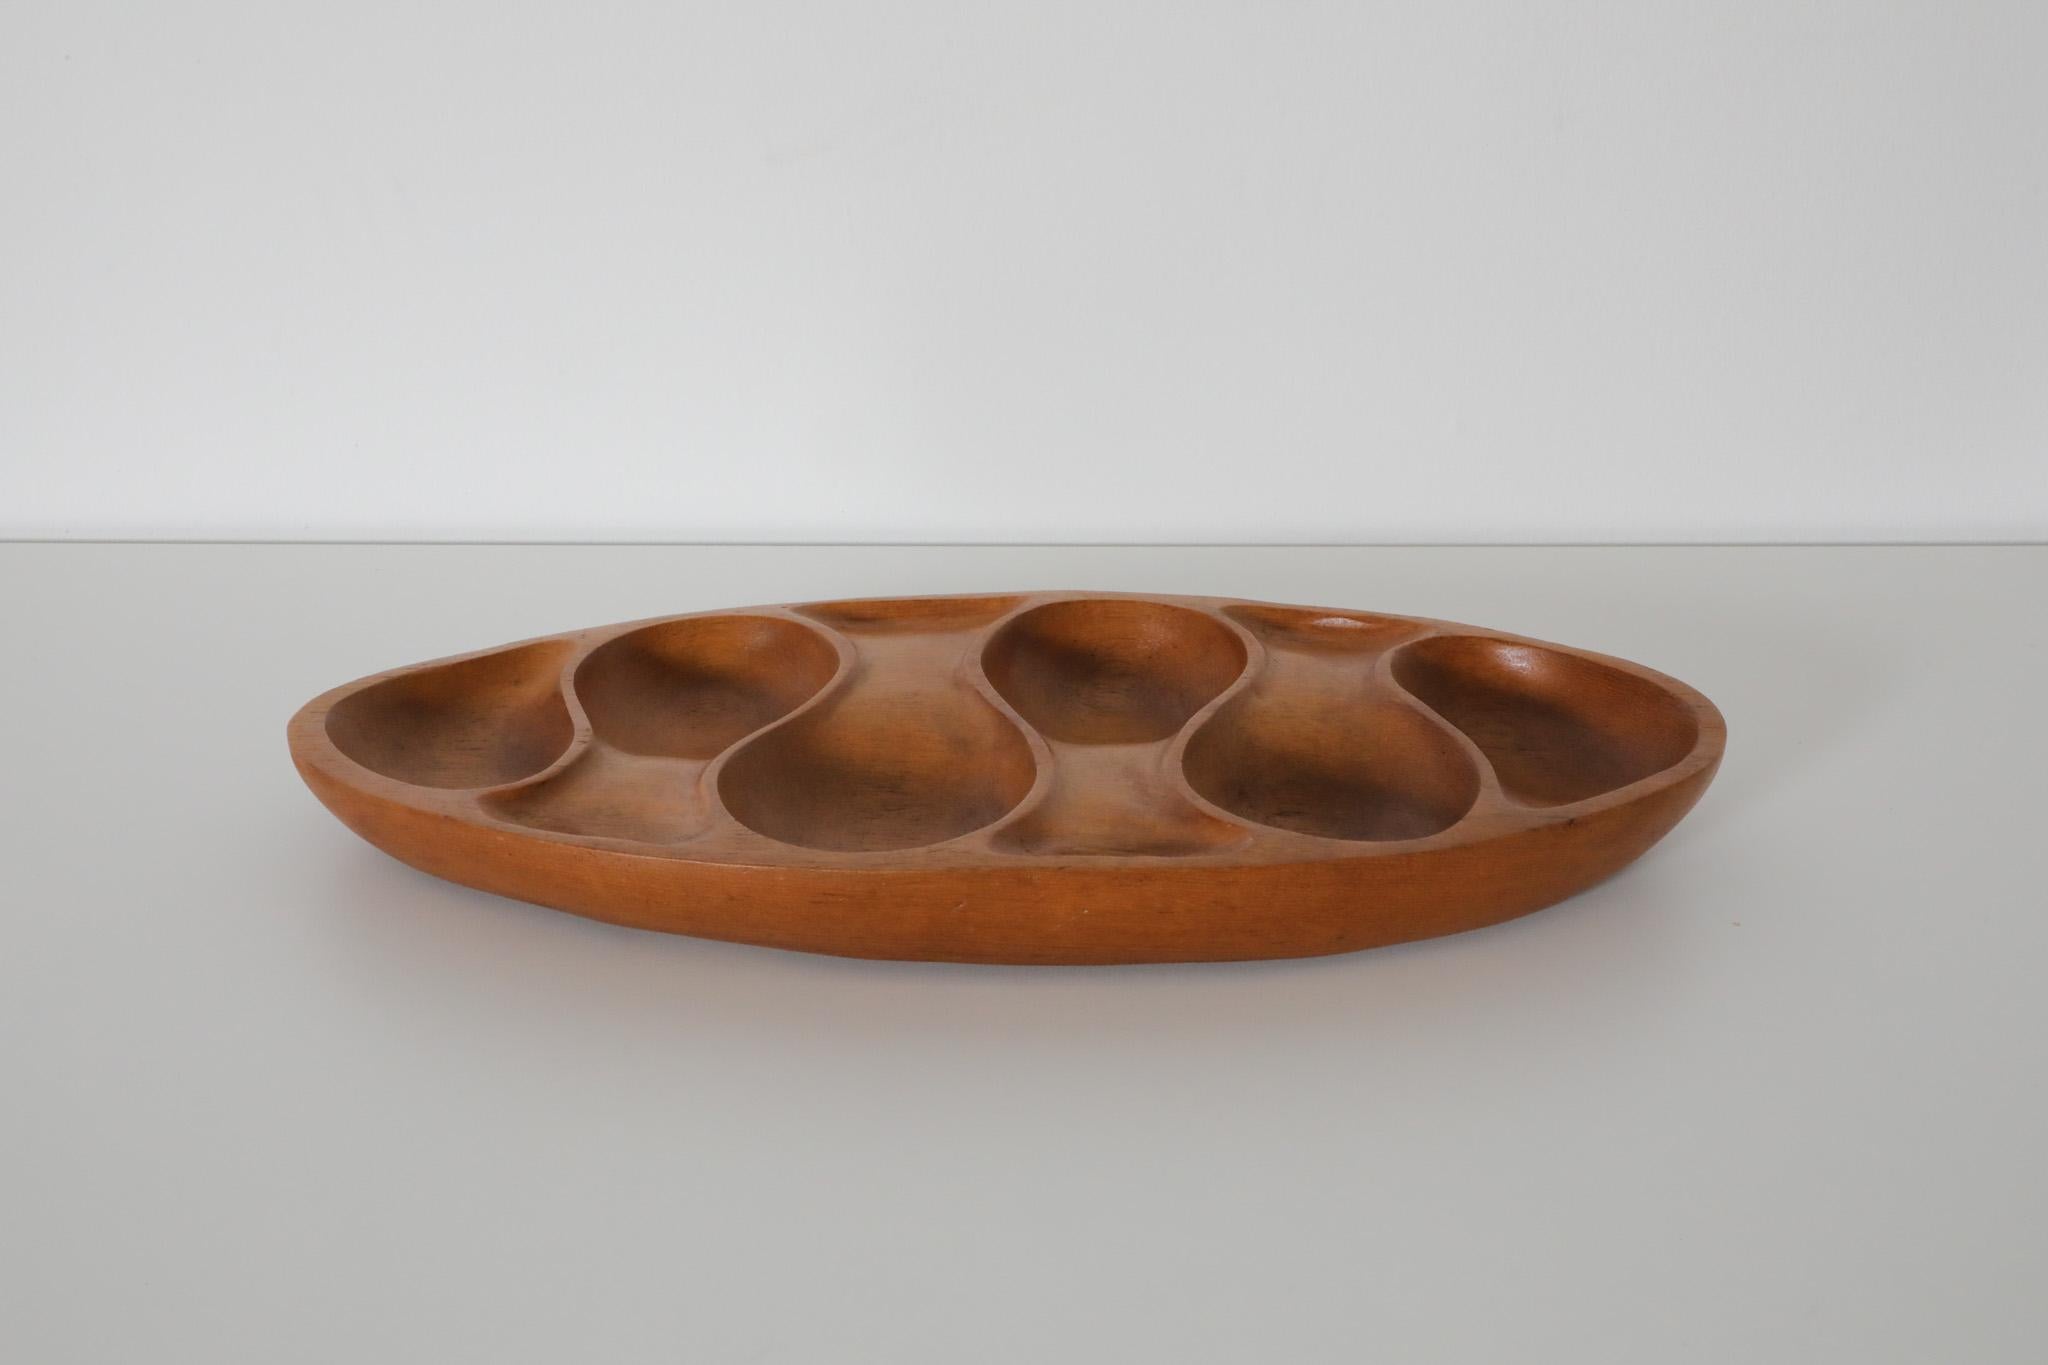 Mid-Century organically carved teak hors d’oeuvres tray with six small compartments in the style Laur Jensen for Odense. A beautiful hand carved bowl that can be used as a serving tray, jewelry organizer or accessory tray. In original condition with